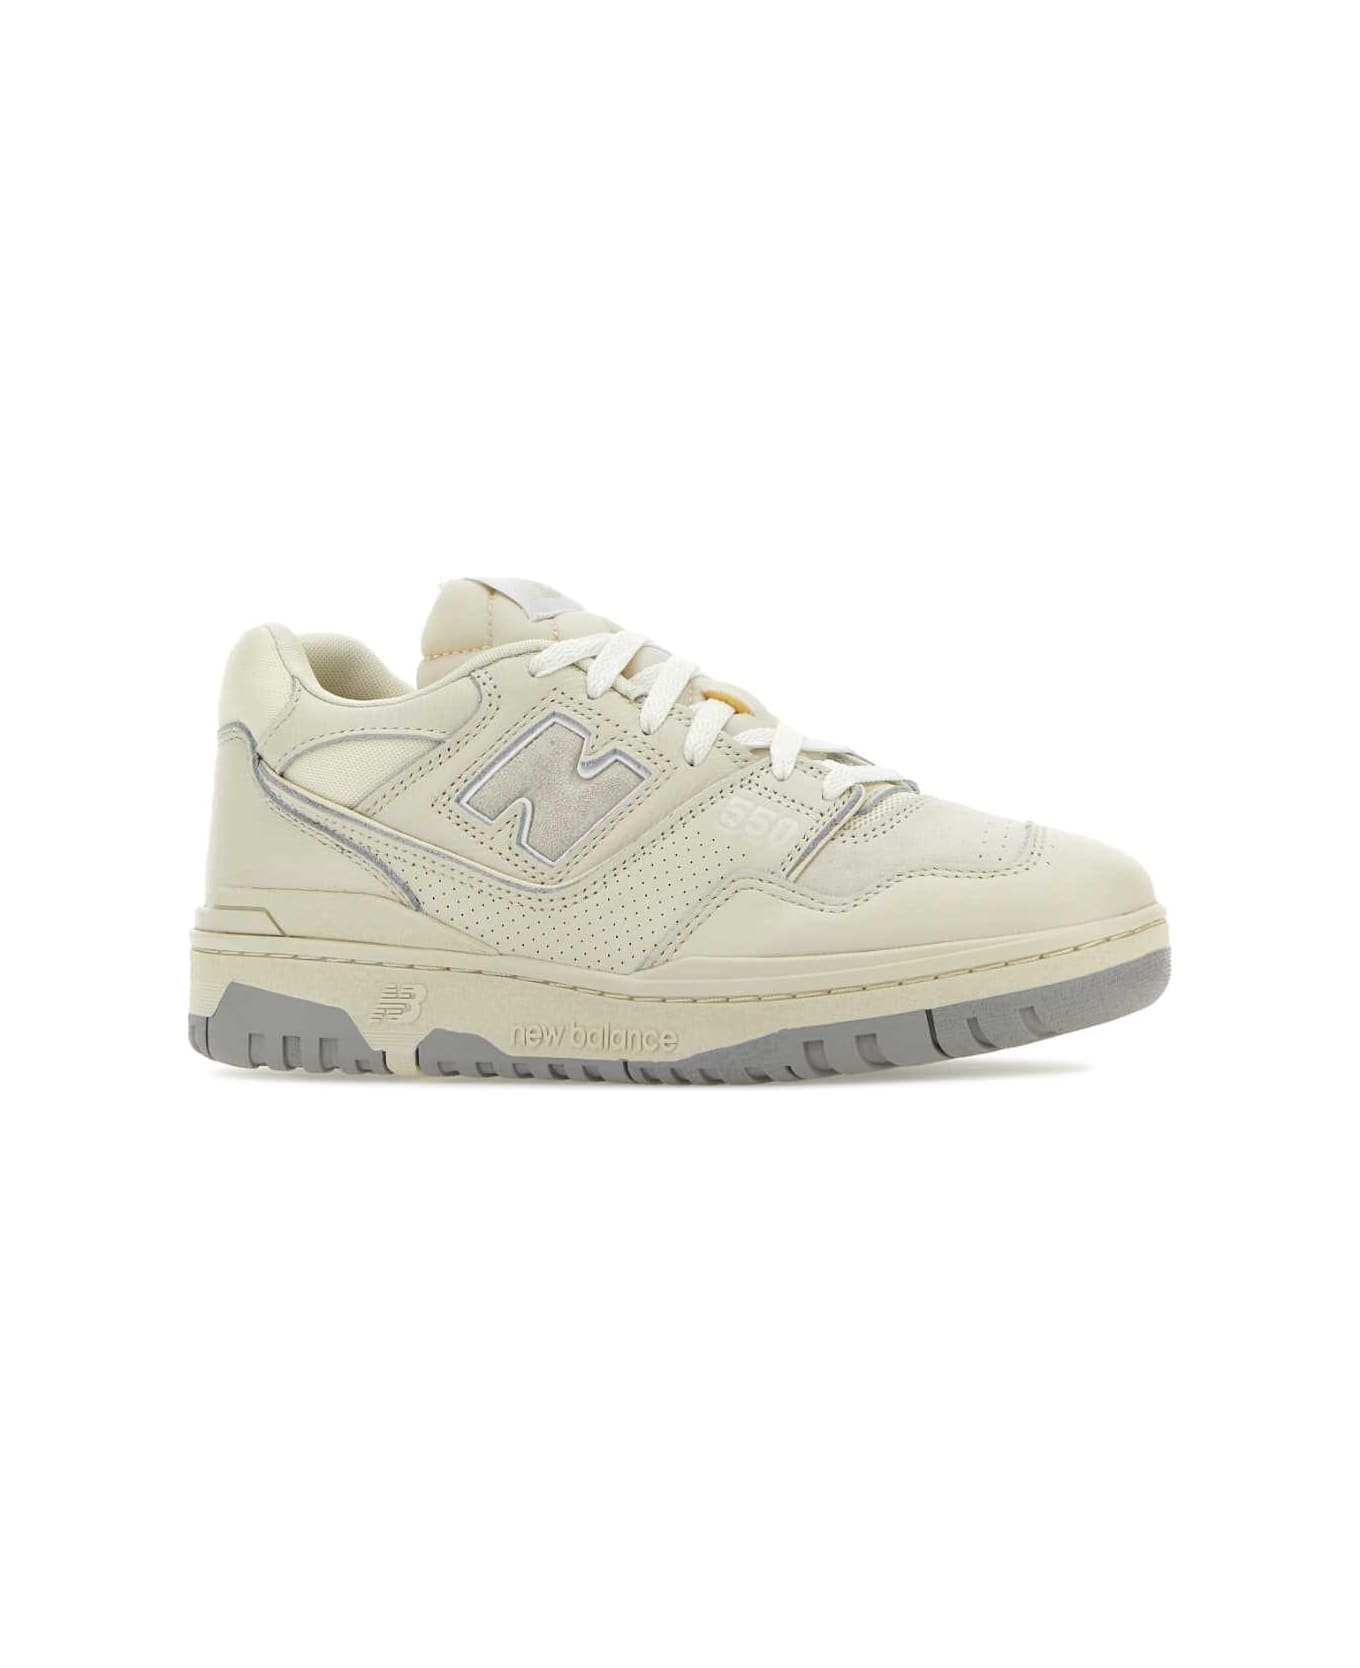 New Balance Sand Leather And Suede 550 Sneakers - TURTLEDOVE スニーカー